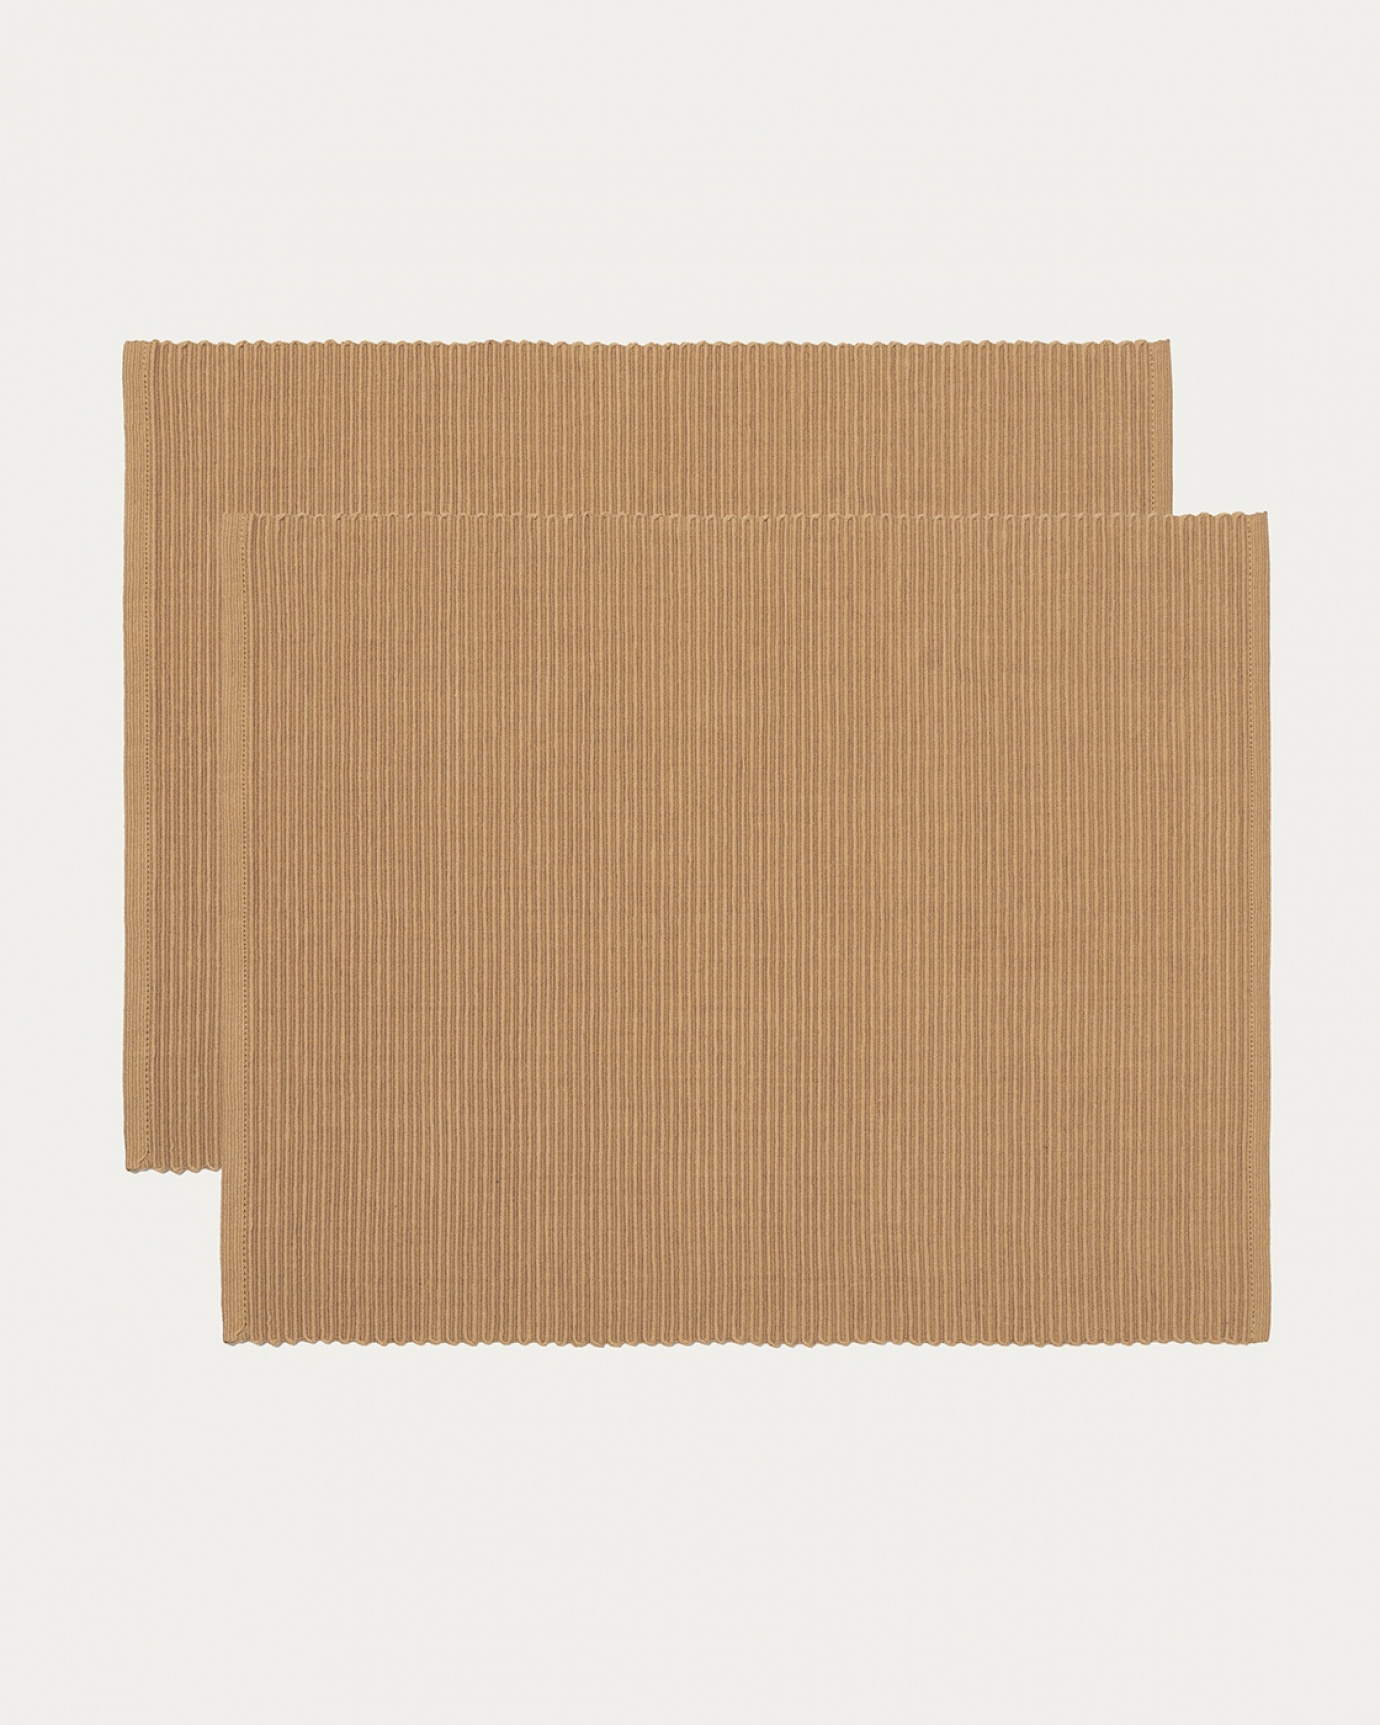 Product image camel brown UNI placemat made of soft cotton in ribbed quality from LINUM DESIGN. Size 35x46 cm and sold in 2-pack.